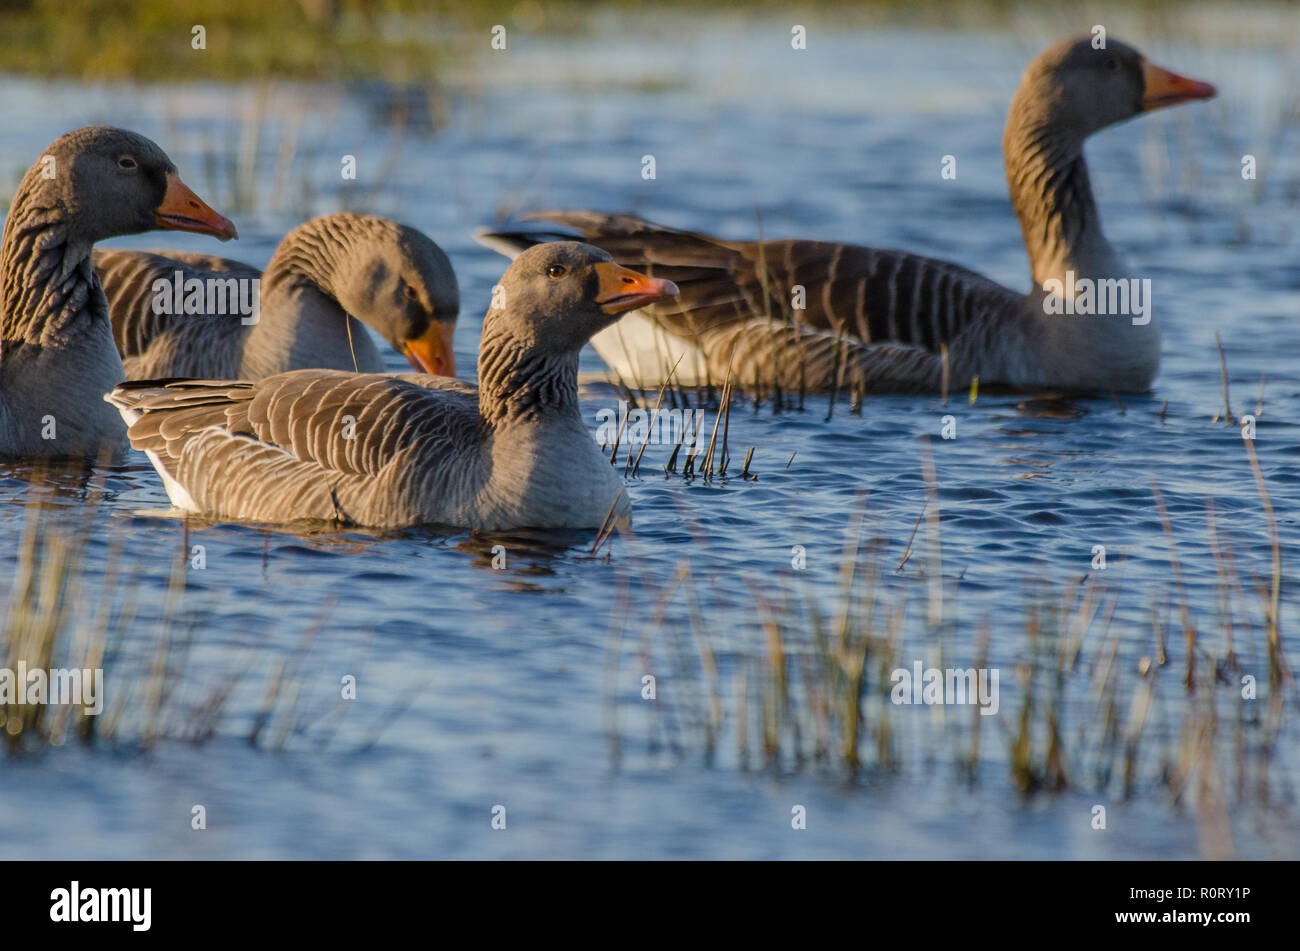 A group of Greylag geese swim together on a lake Stock Photo